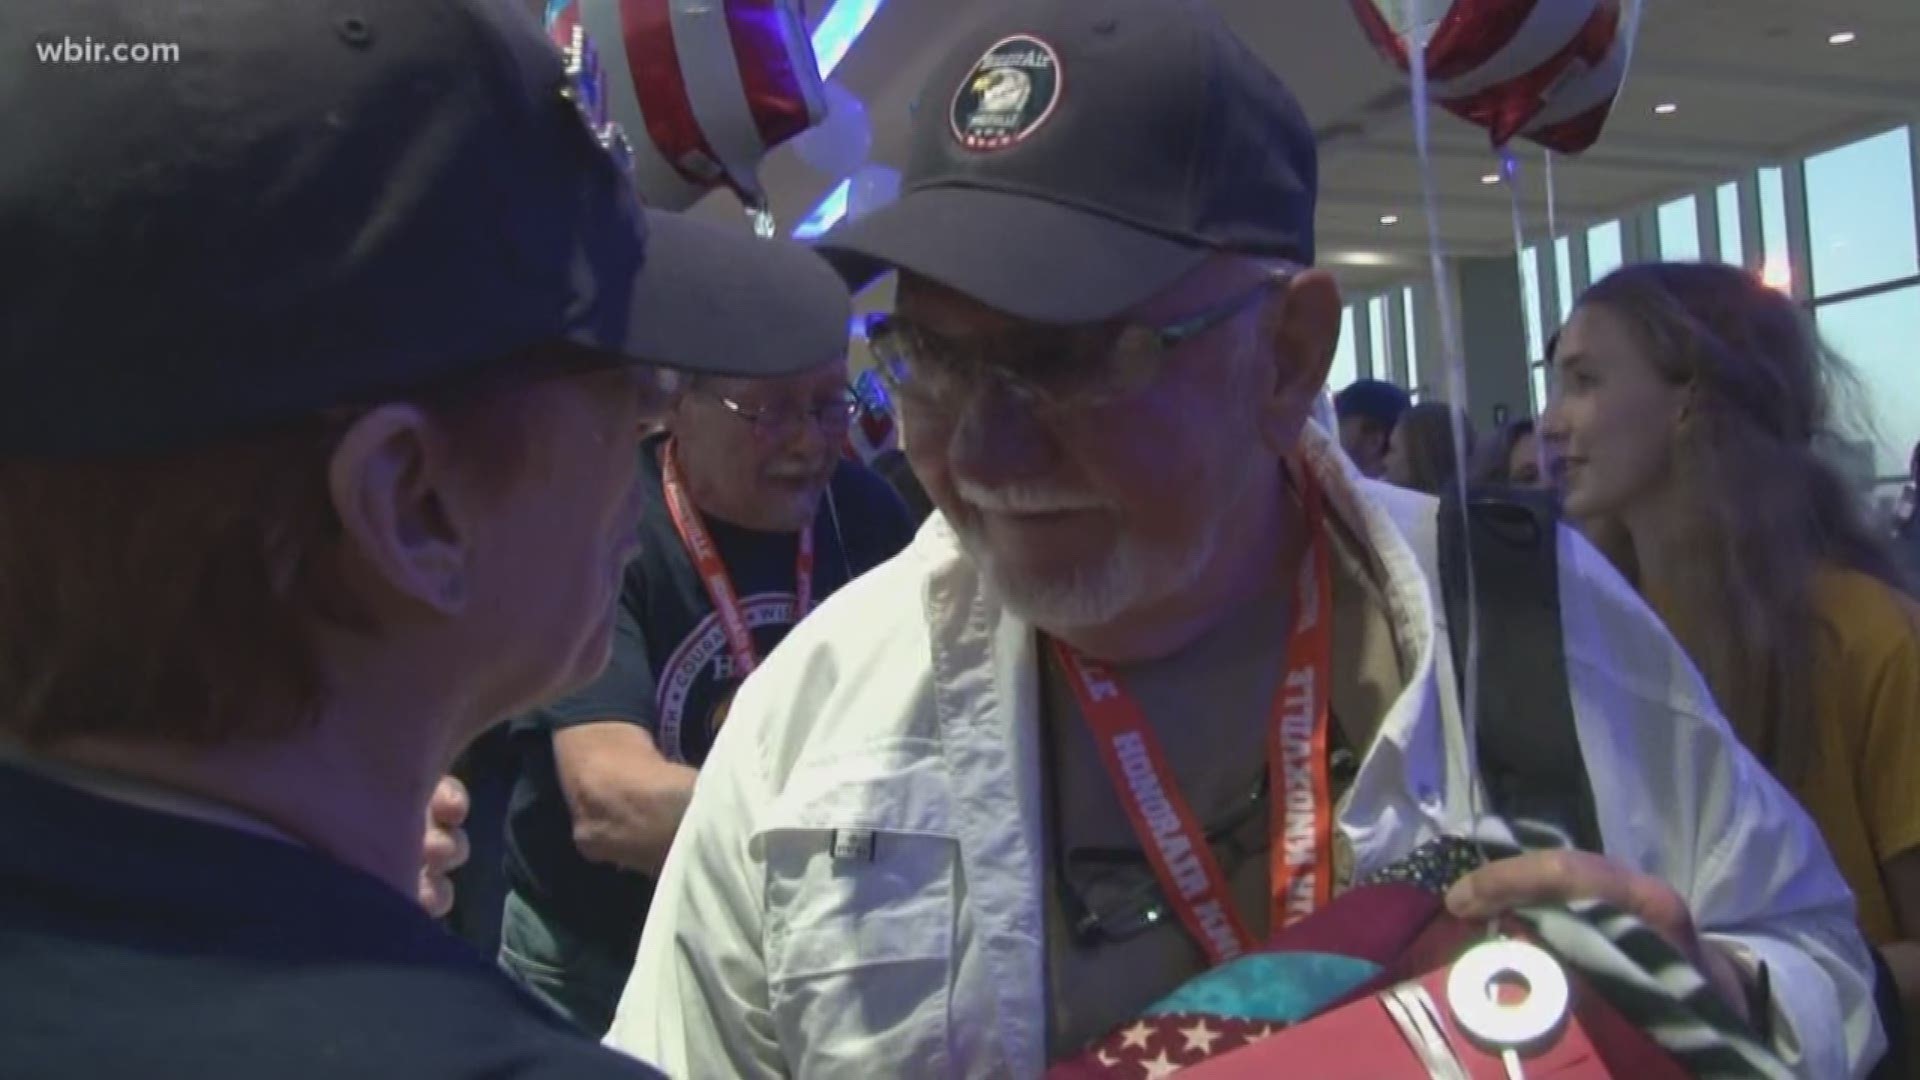 130 military veterans from East Tennessee touched down tonight after a whirlwind trip to D.C.